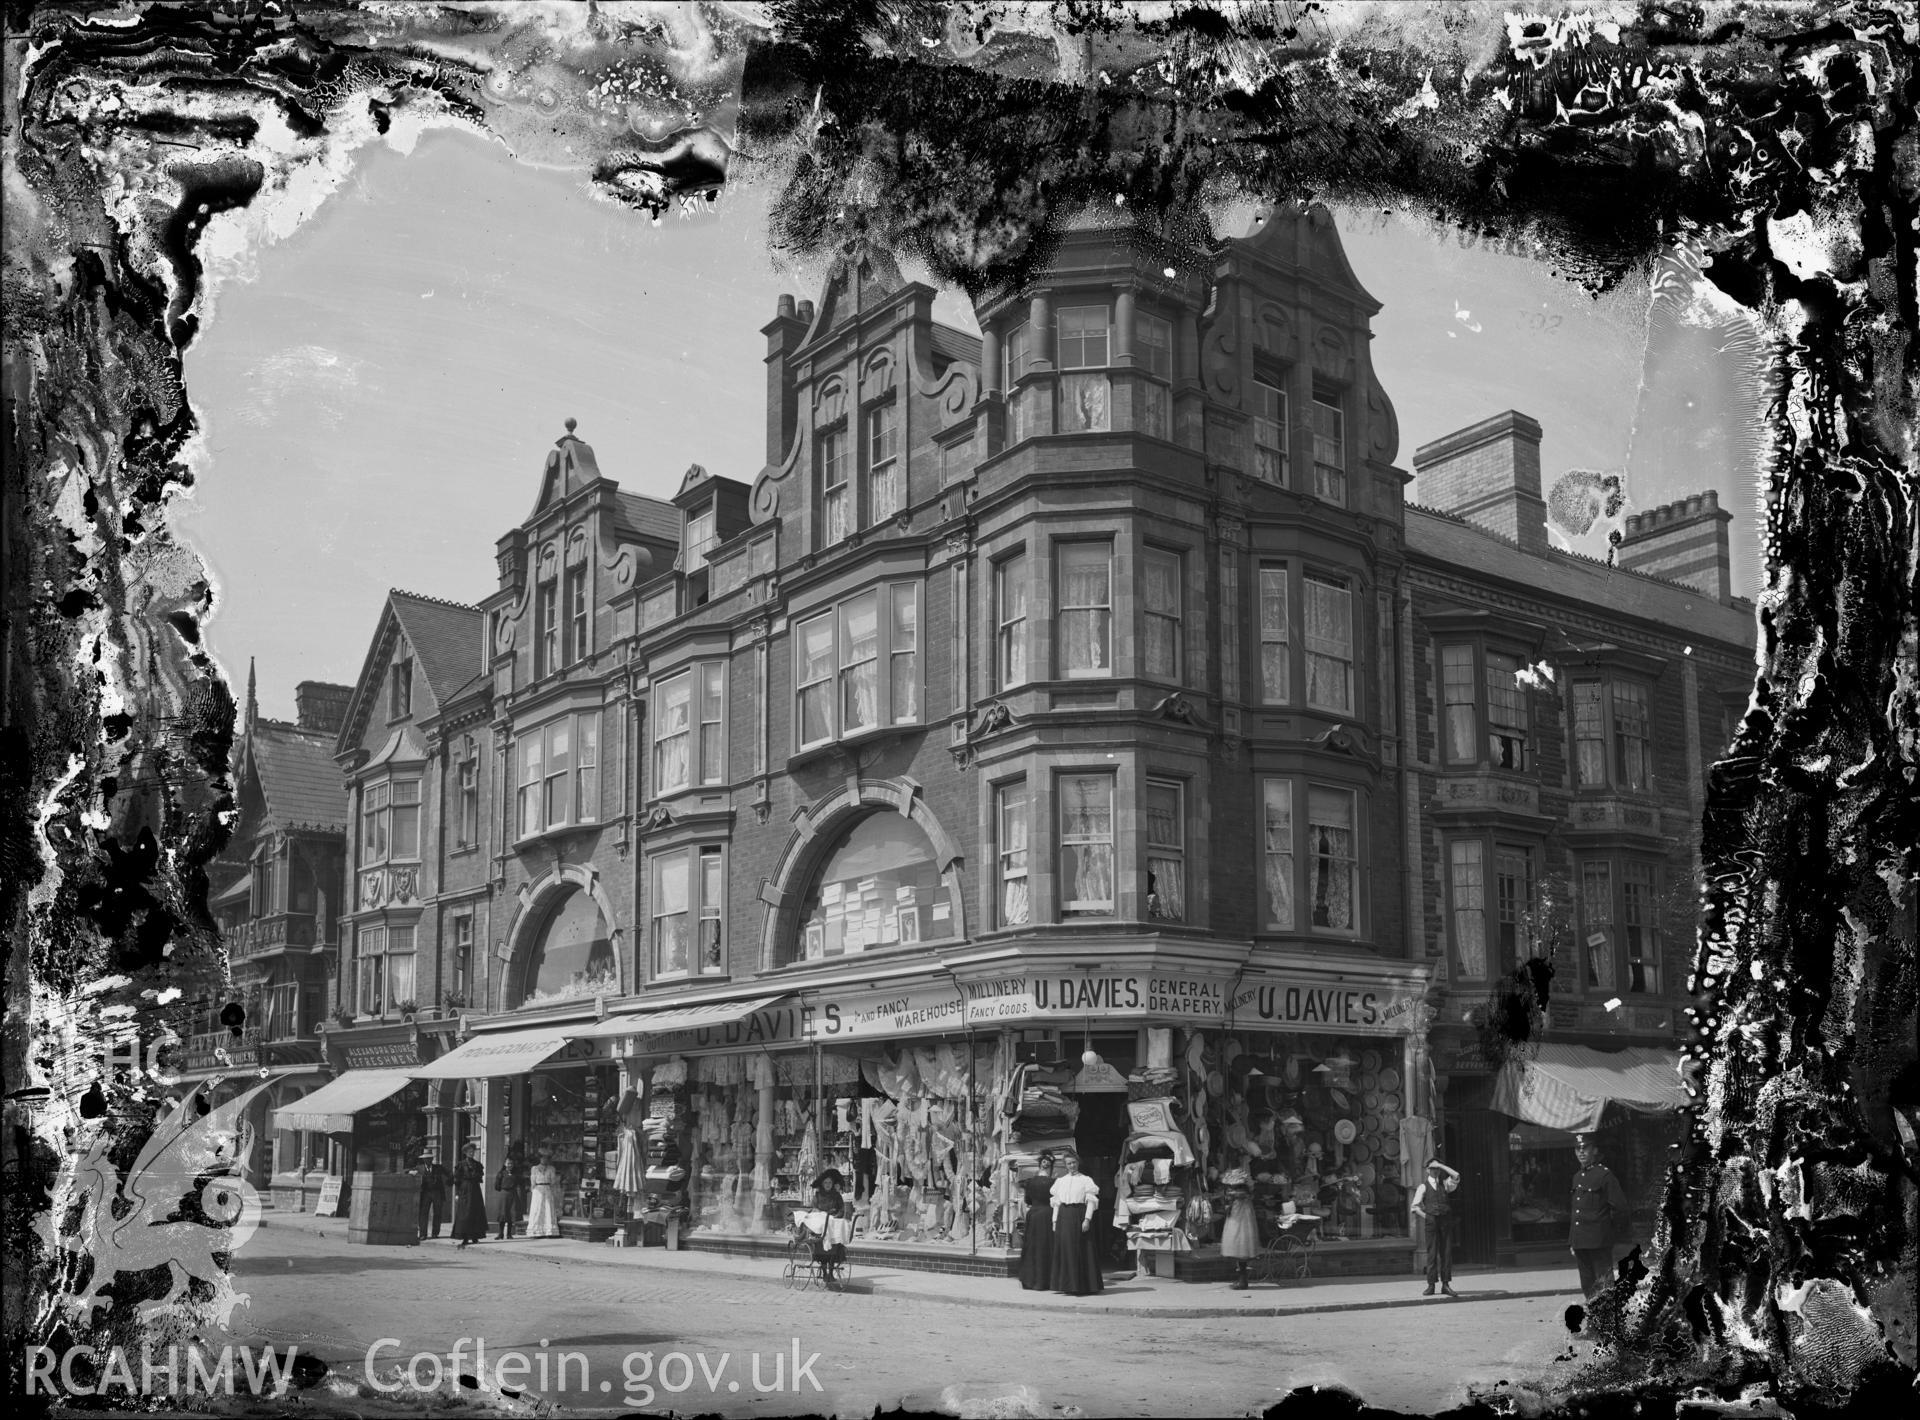 Black and white image dating from c.1910 showing view of U. Davies drapery and millinery which stood on the corner of Alexandra Road and Terrace Road, now occupied by Express Cafe.